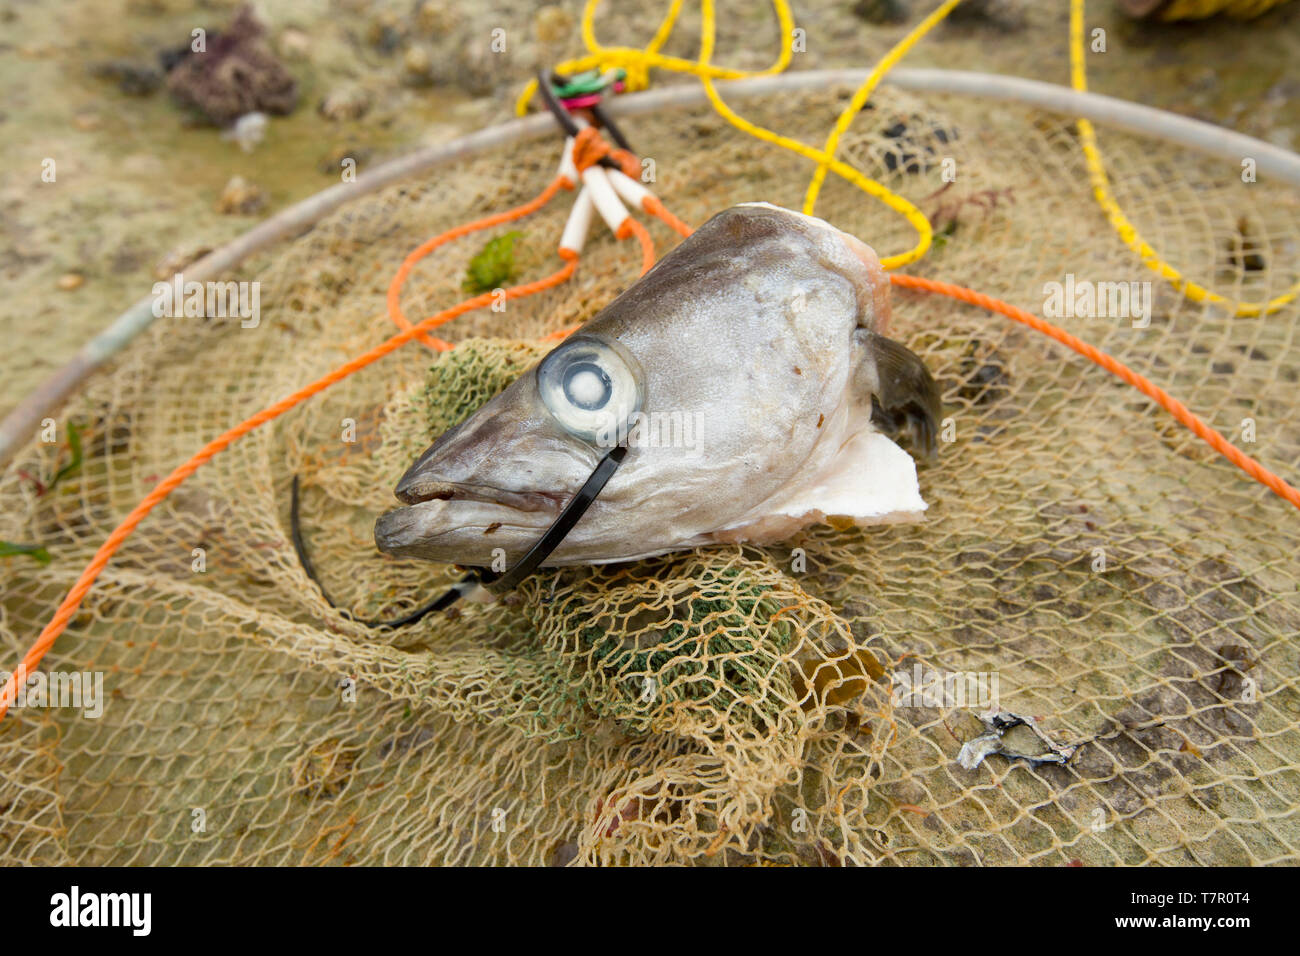 A drop net and chord, baited with a pollack’s head, Pollachius pollachius, that is intended for catching edible crabs. It is dropped into a likely spo Stock Photo